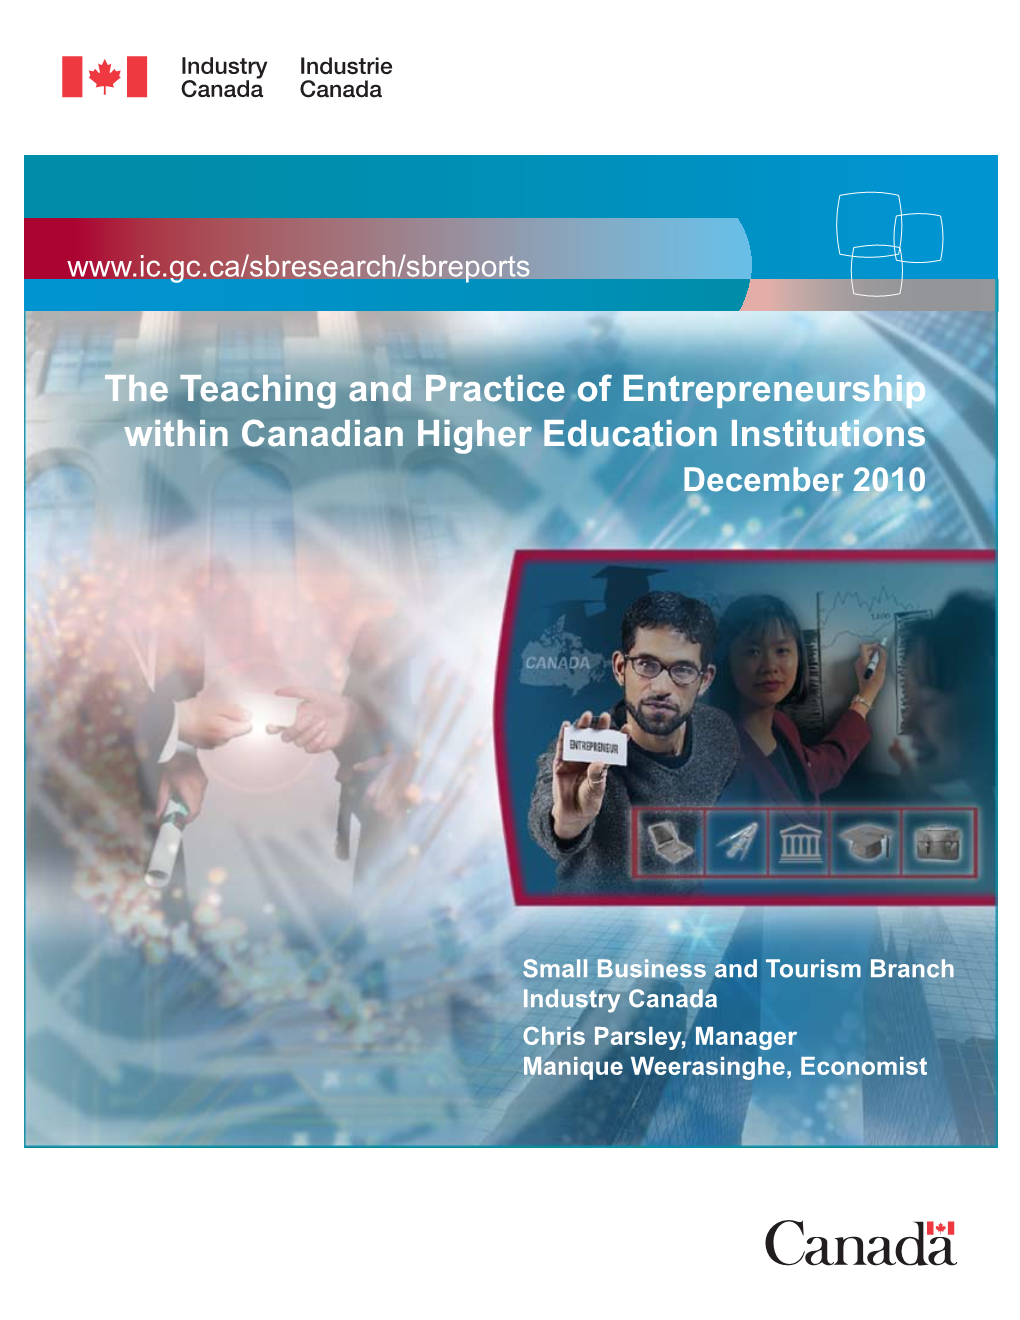 The Teaching and Practice of Entrepreneurship Within Canadian Higher Education Institutions December 2010